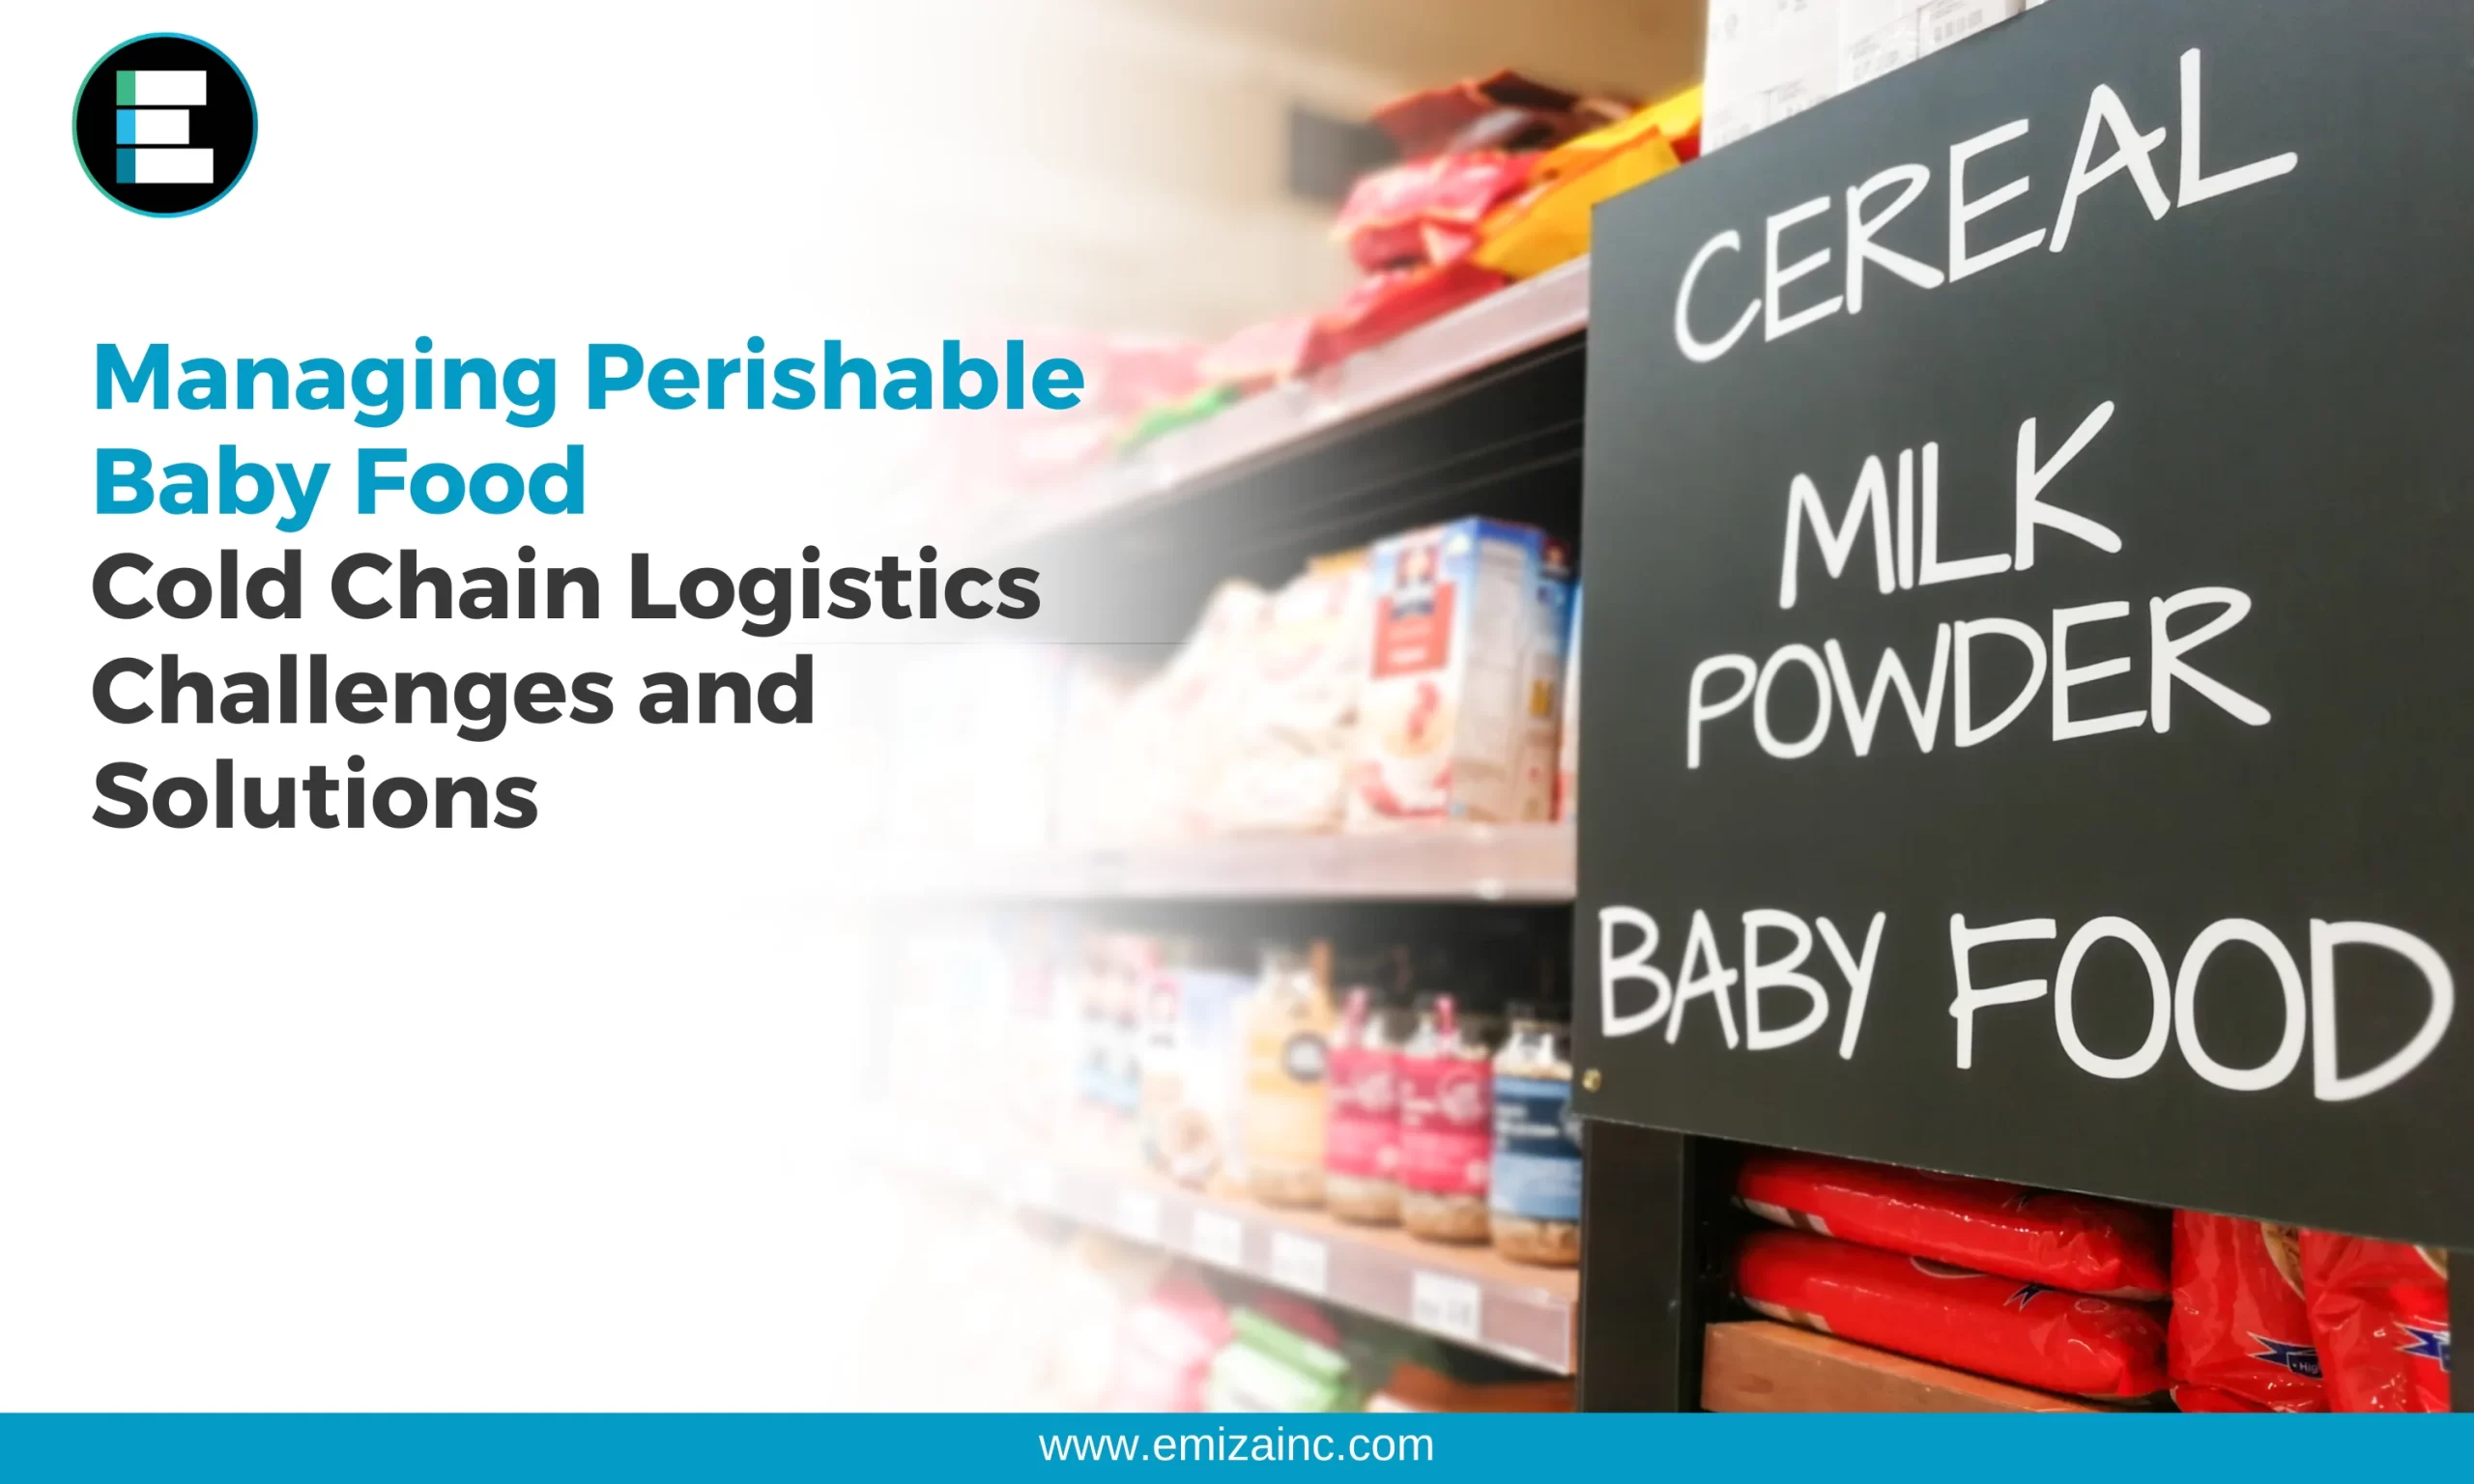 Managing Perishable Baby Food: Cold Chain Logistics Challenges and Solutions